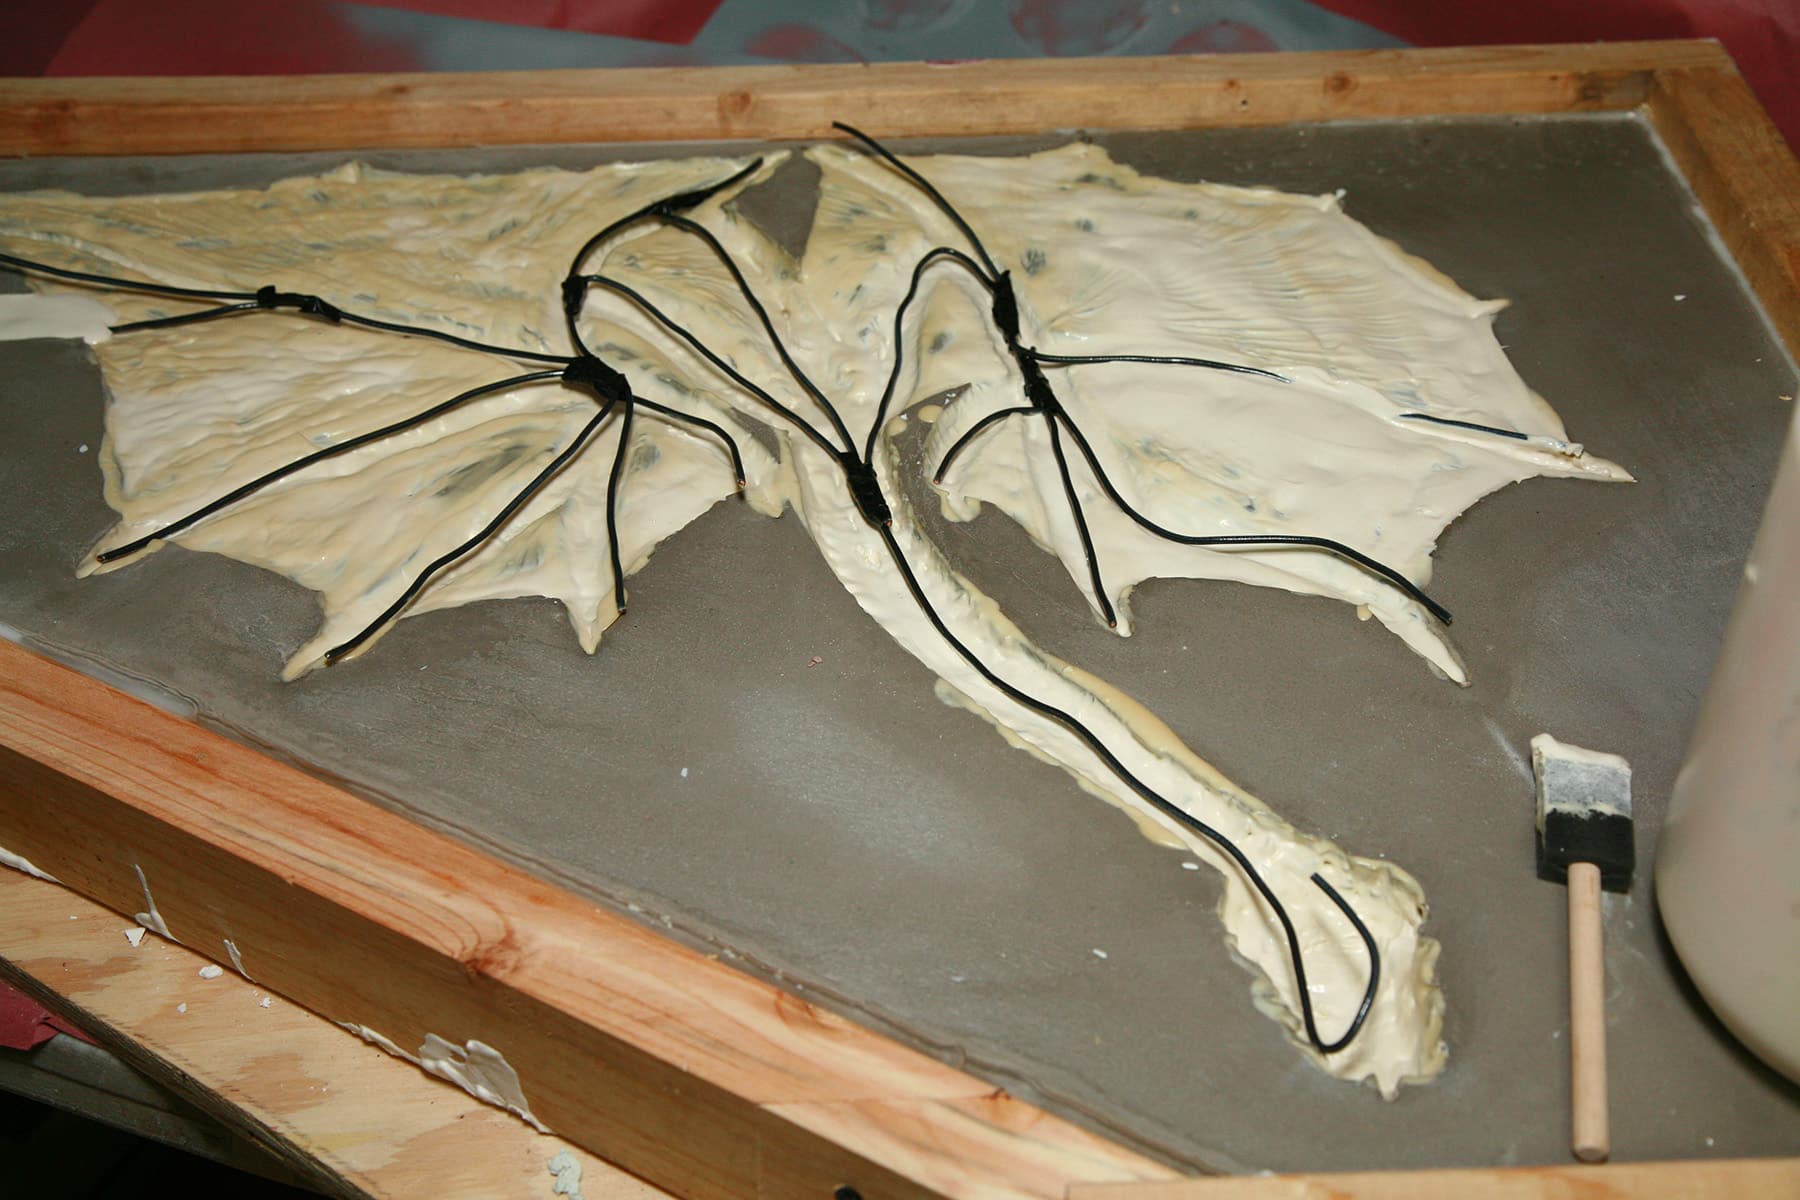 A thin layer of latex is in the mold, and the wire skeleton has been placed on it.